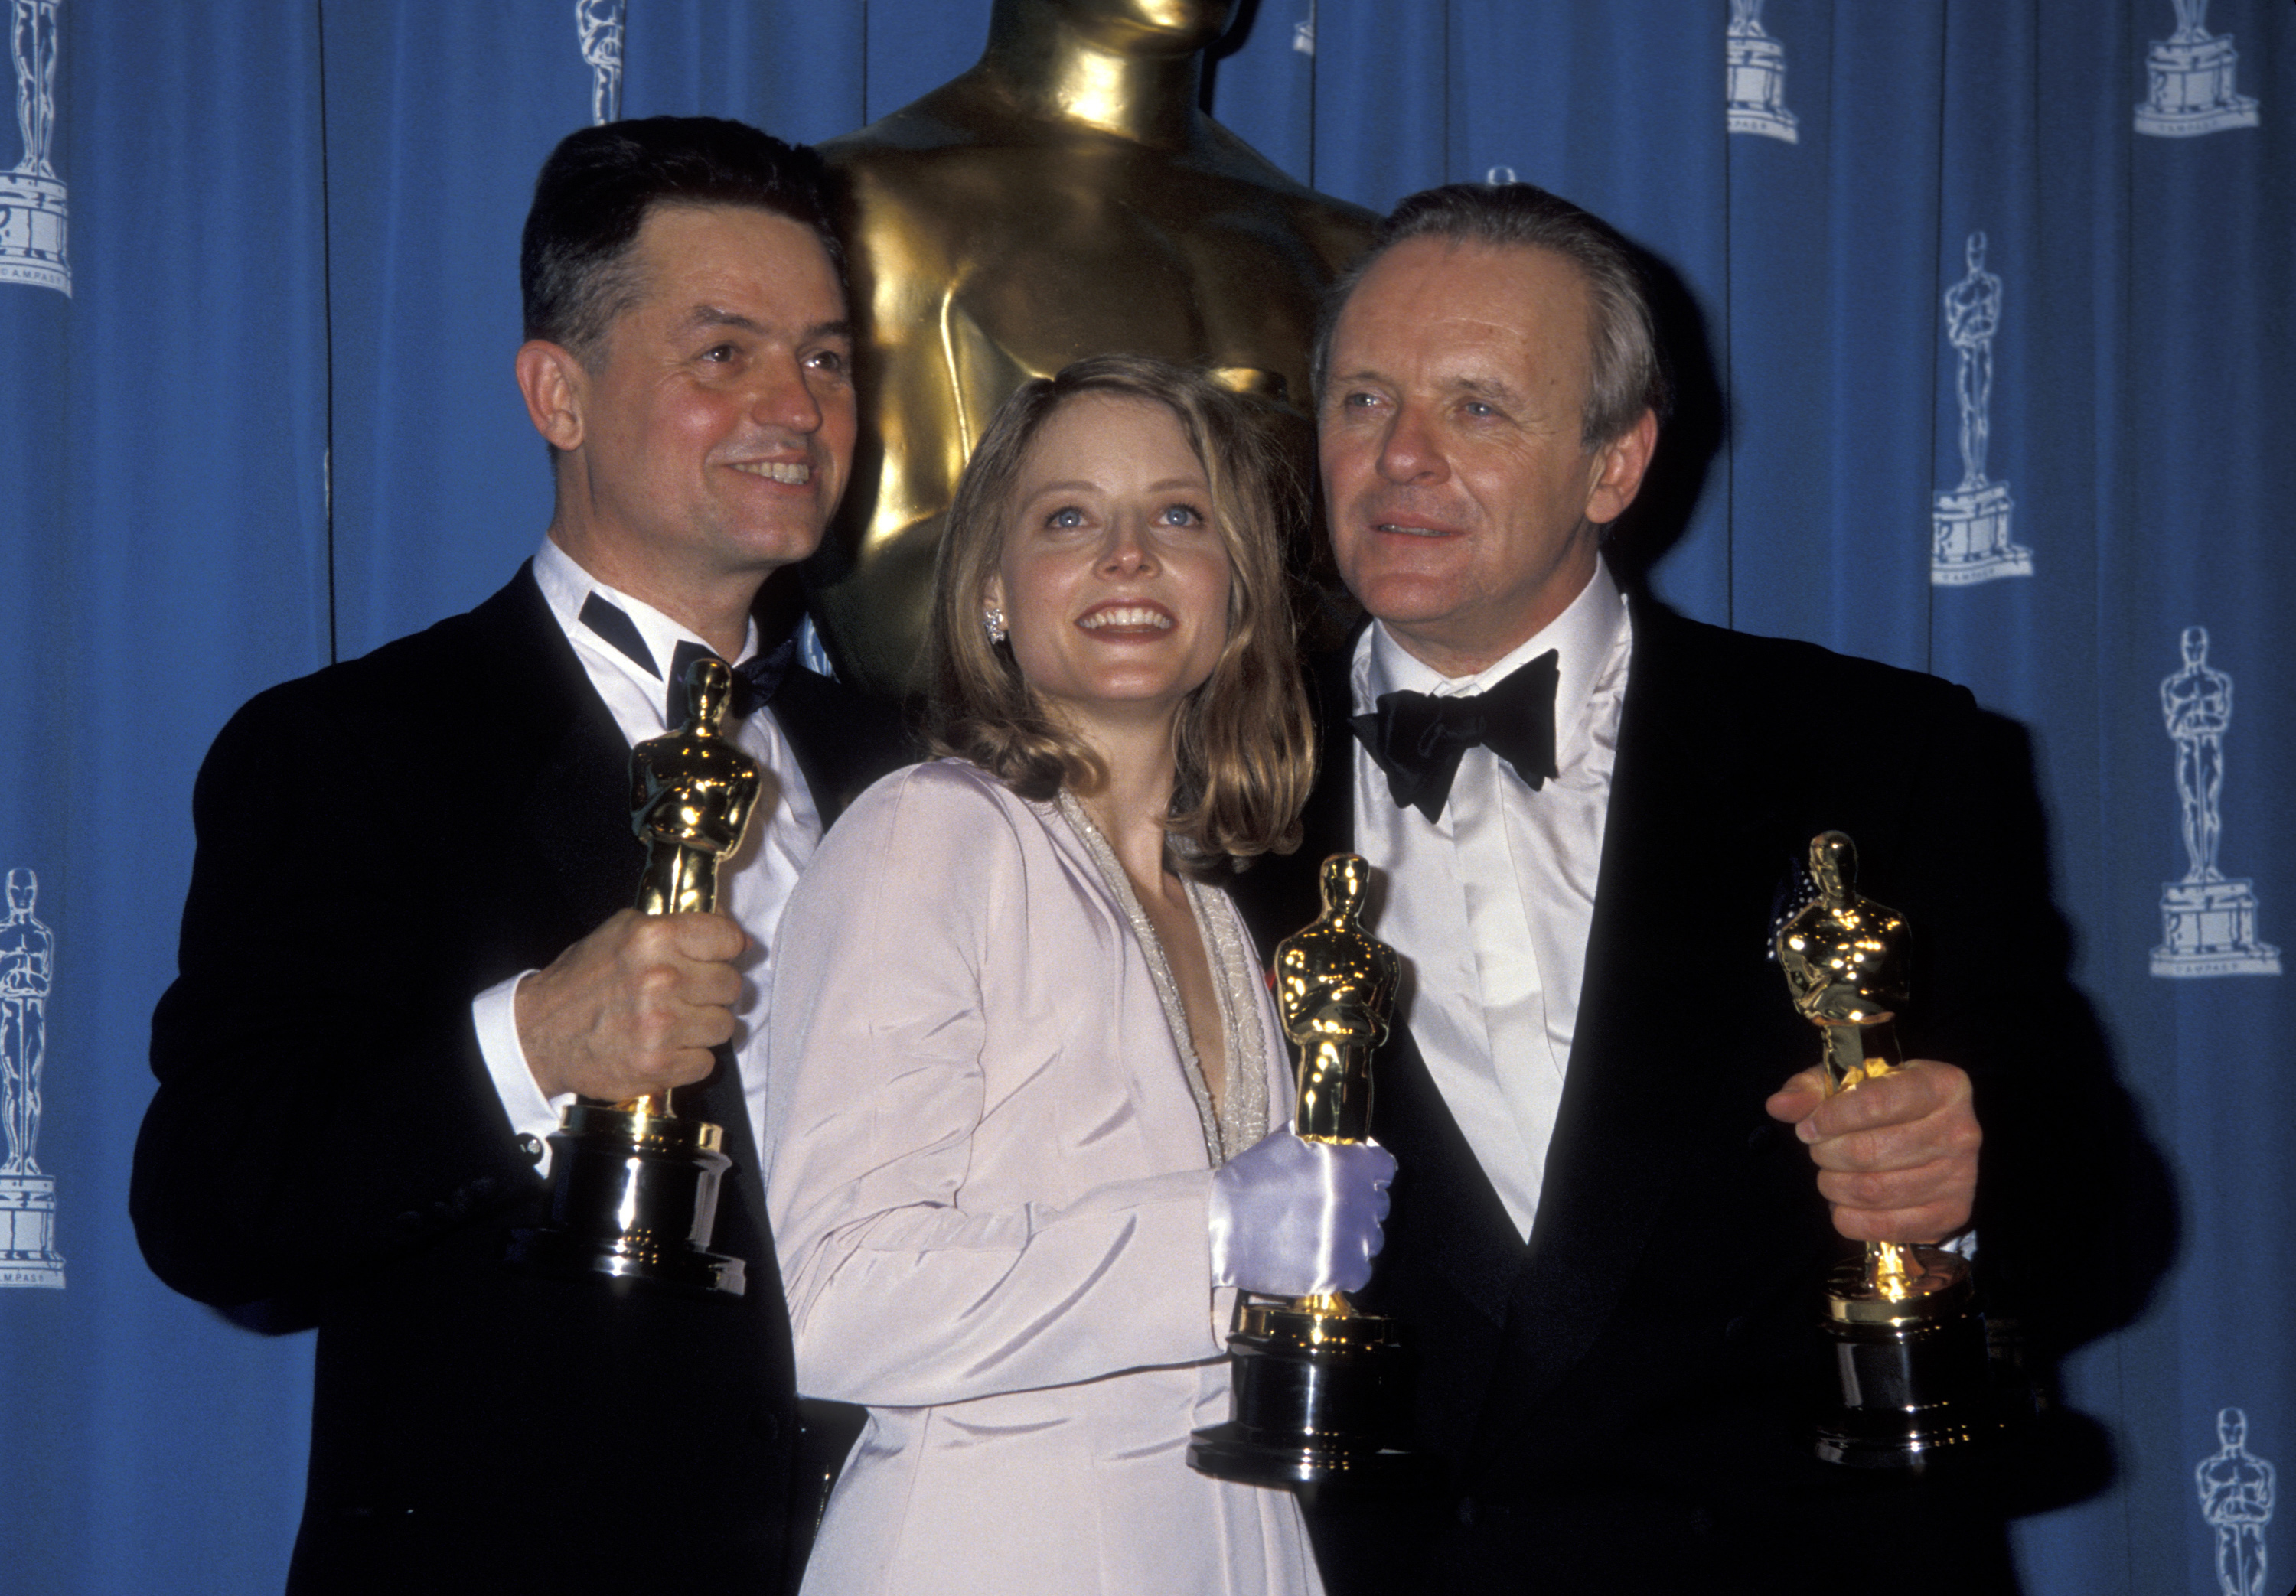 Three individuals at an awards ceremony holding trophies. Two in tuxedos, one in a blazer and dress